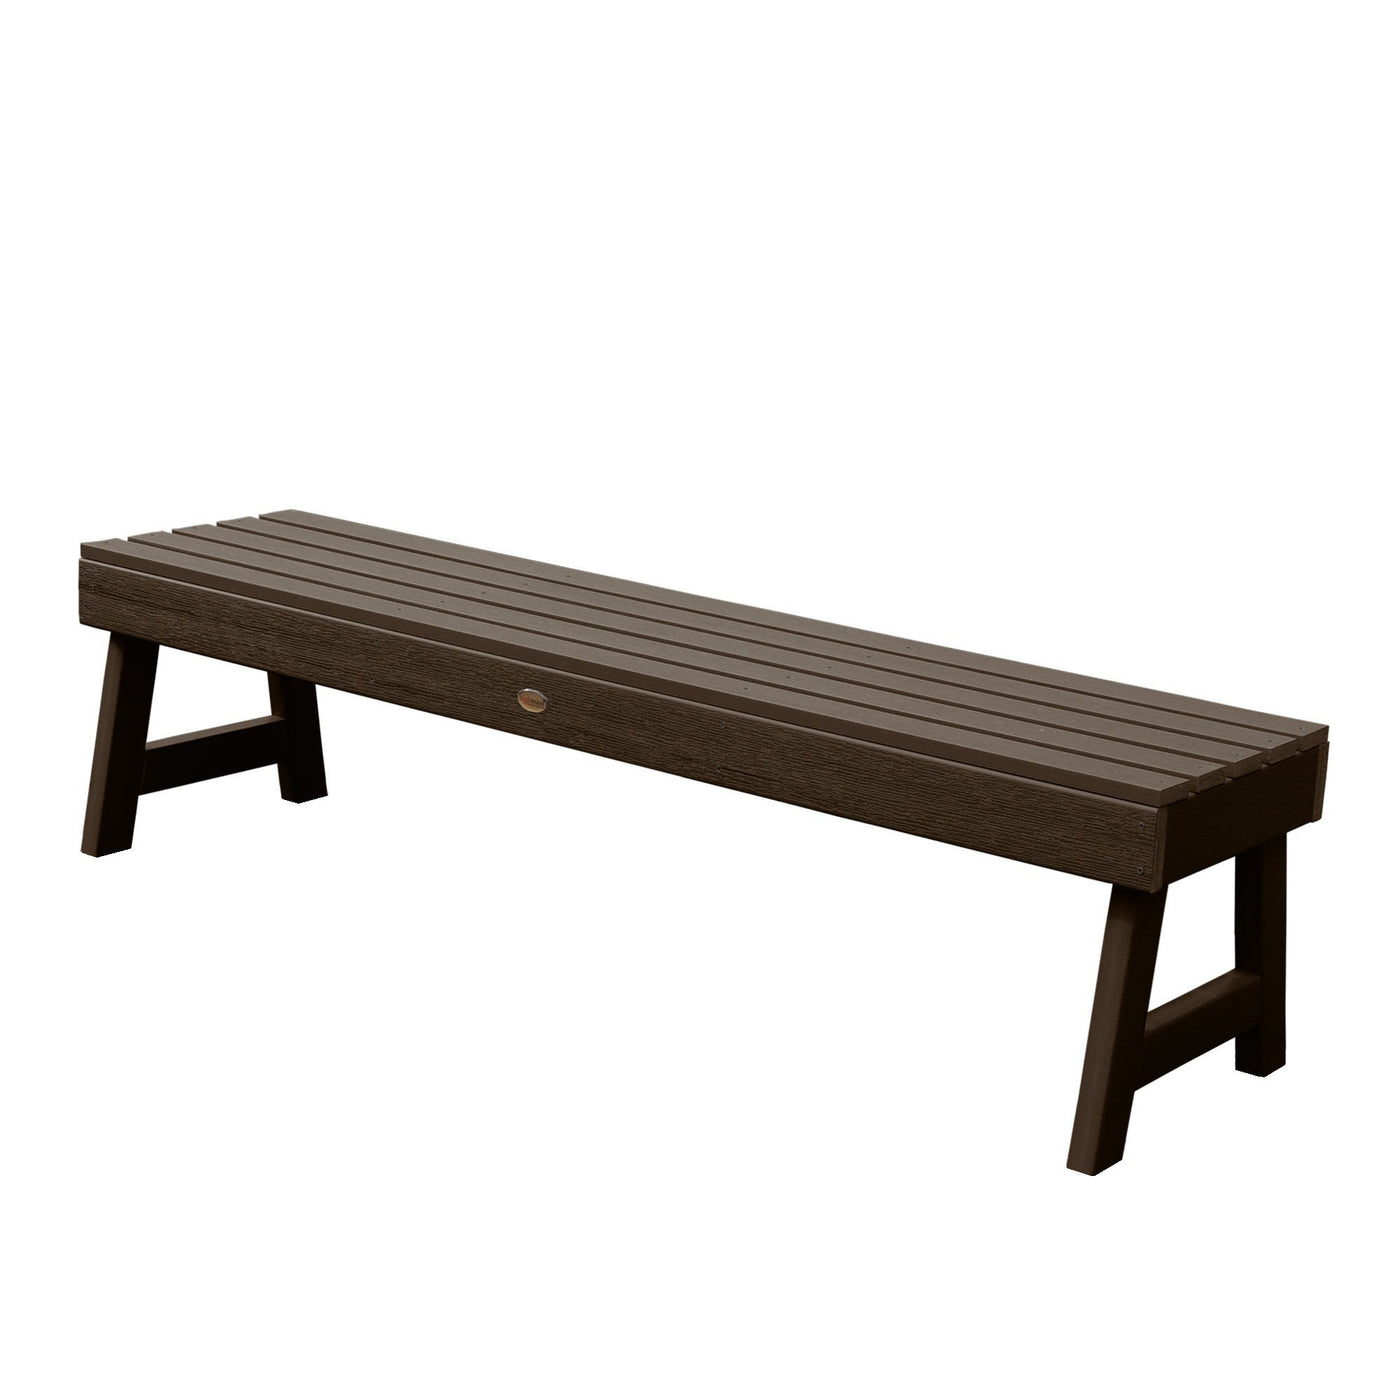 Weatherly Picnic Backless Bench - 5ft BenchSwing Highwood USA Weathered Acorn 